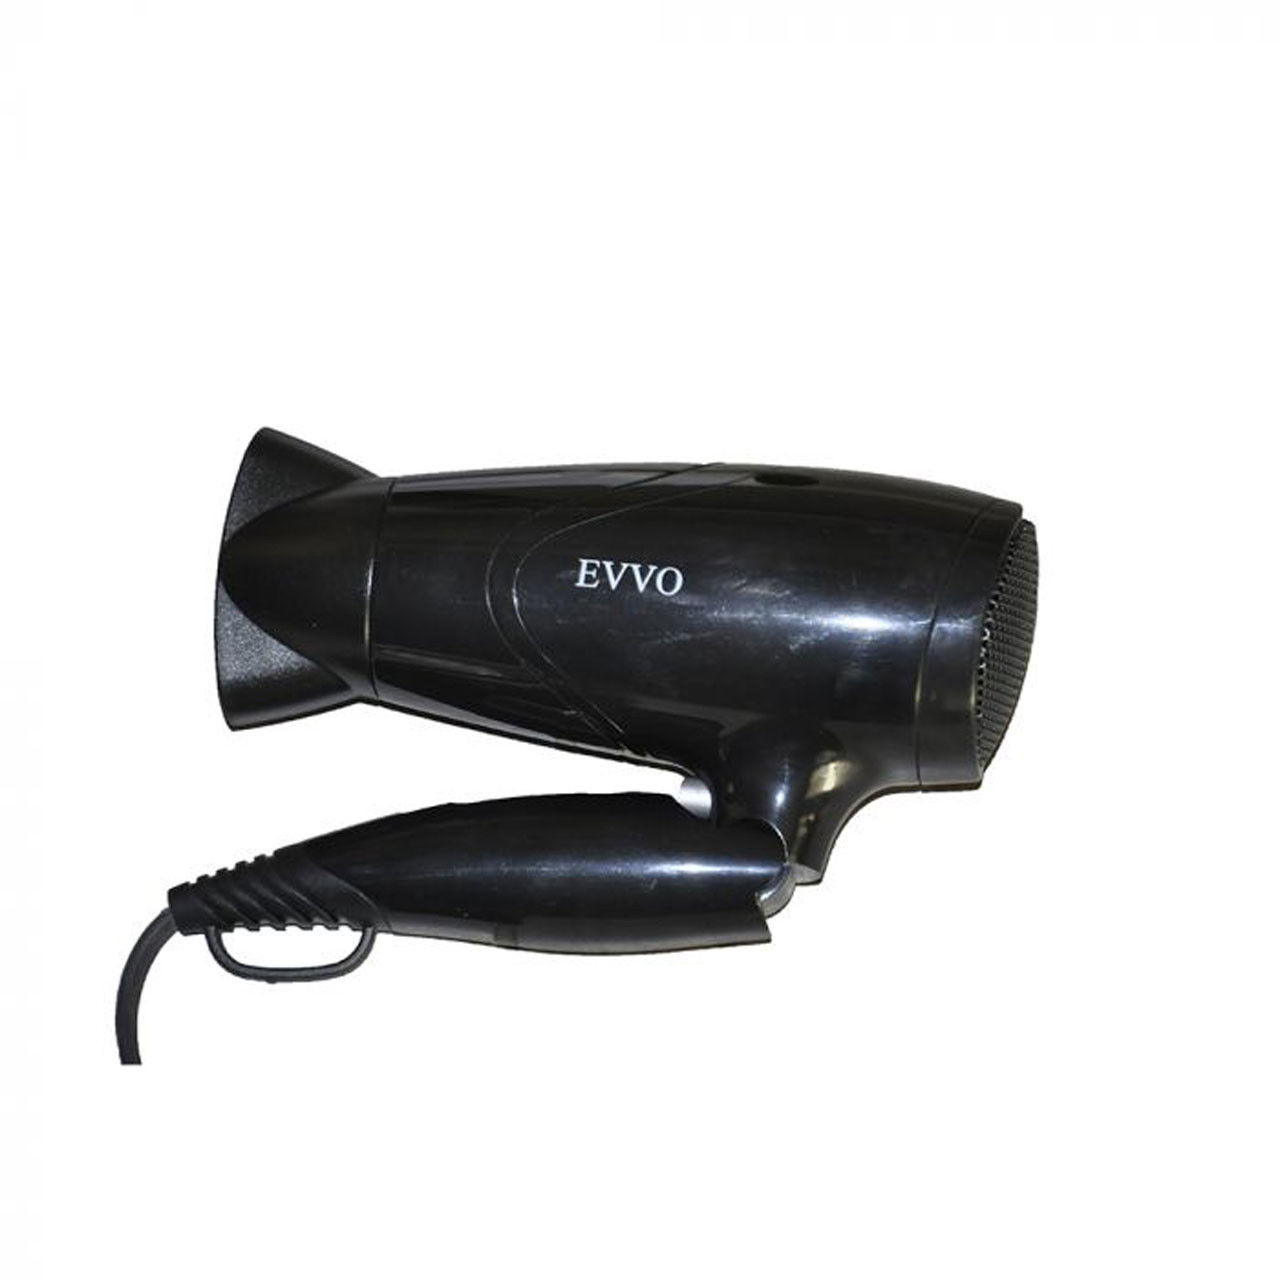 What color is the foldable hair dryer?